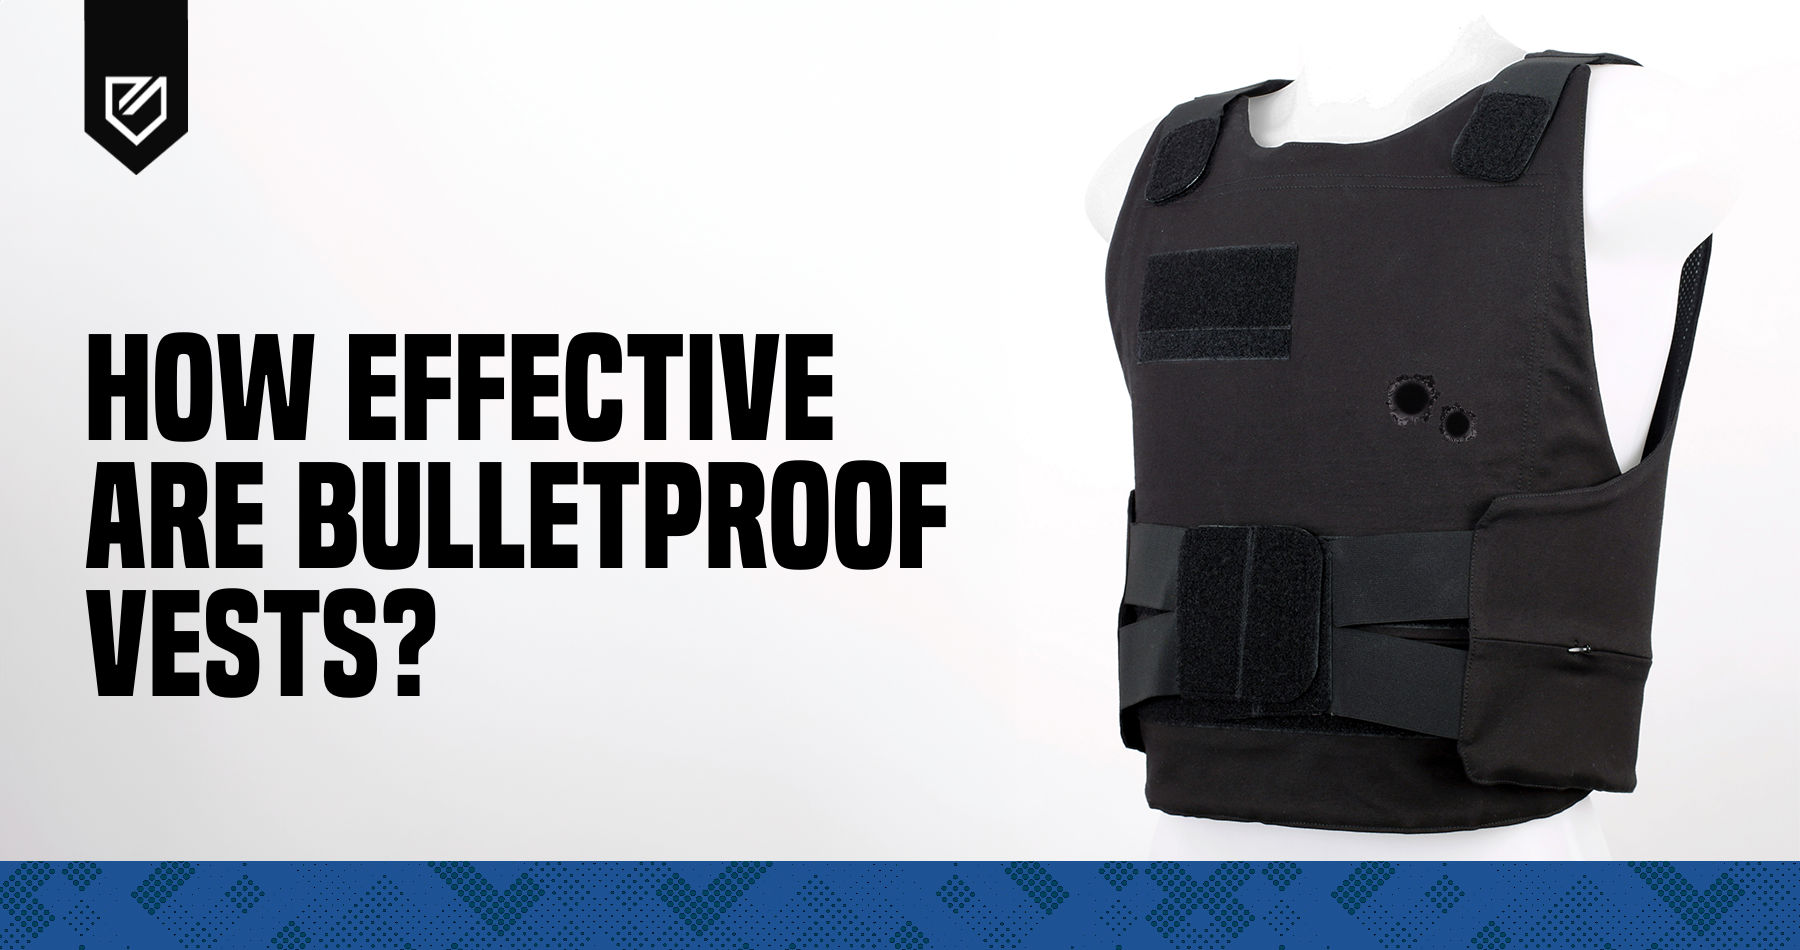 How Effective Are Bullet Proof Vests? 5 Reasons to Make Them Your Next Purchase